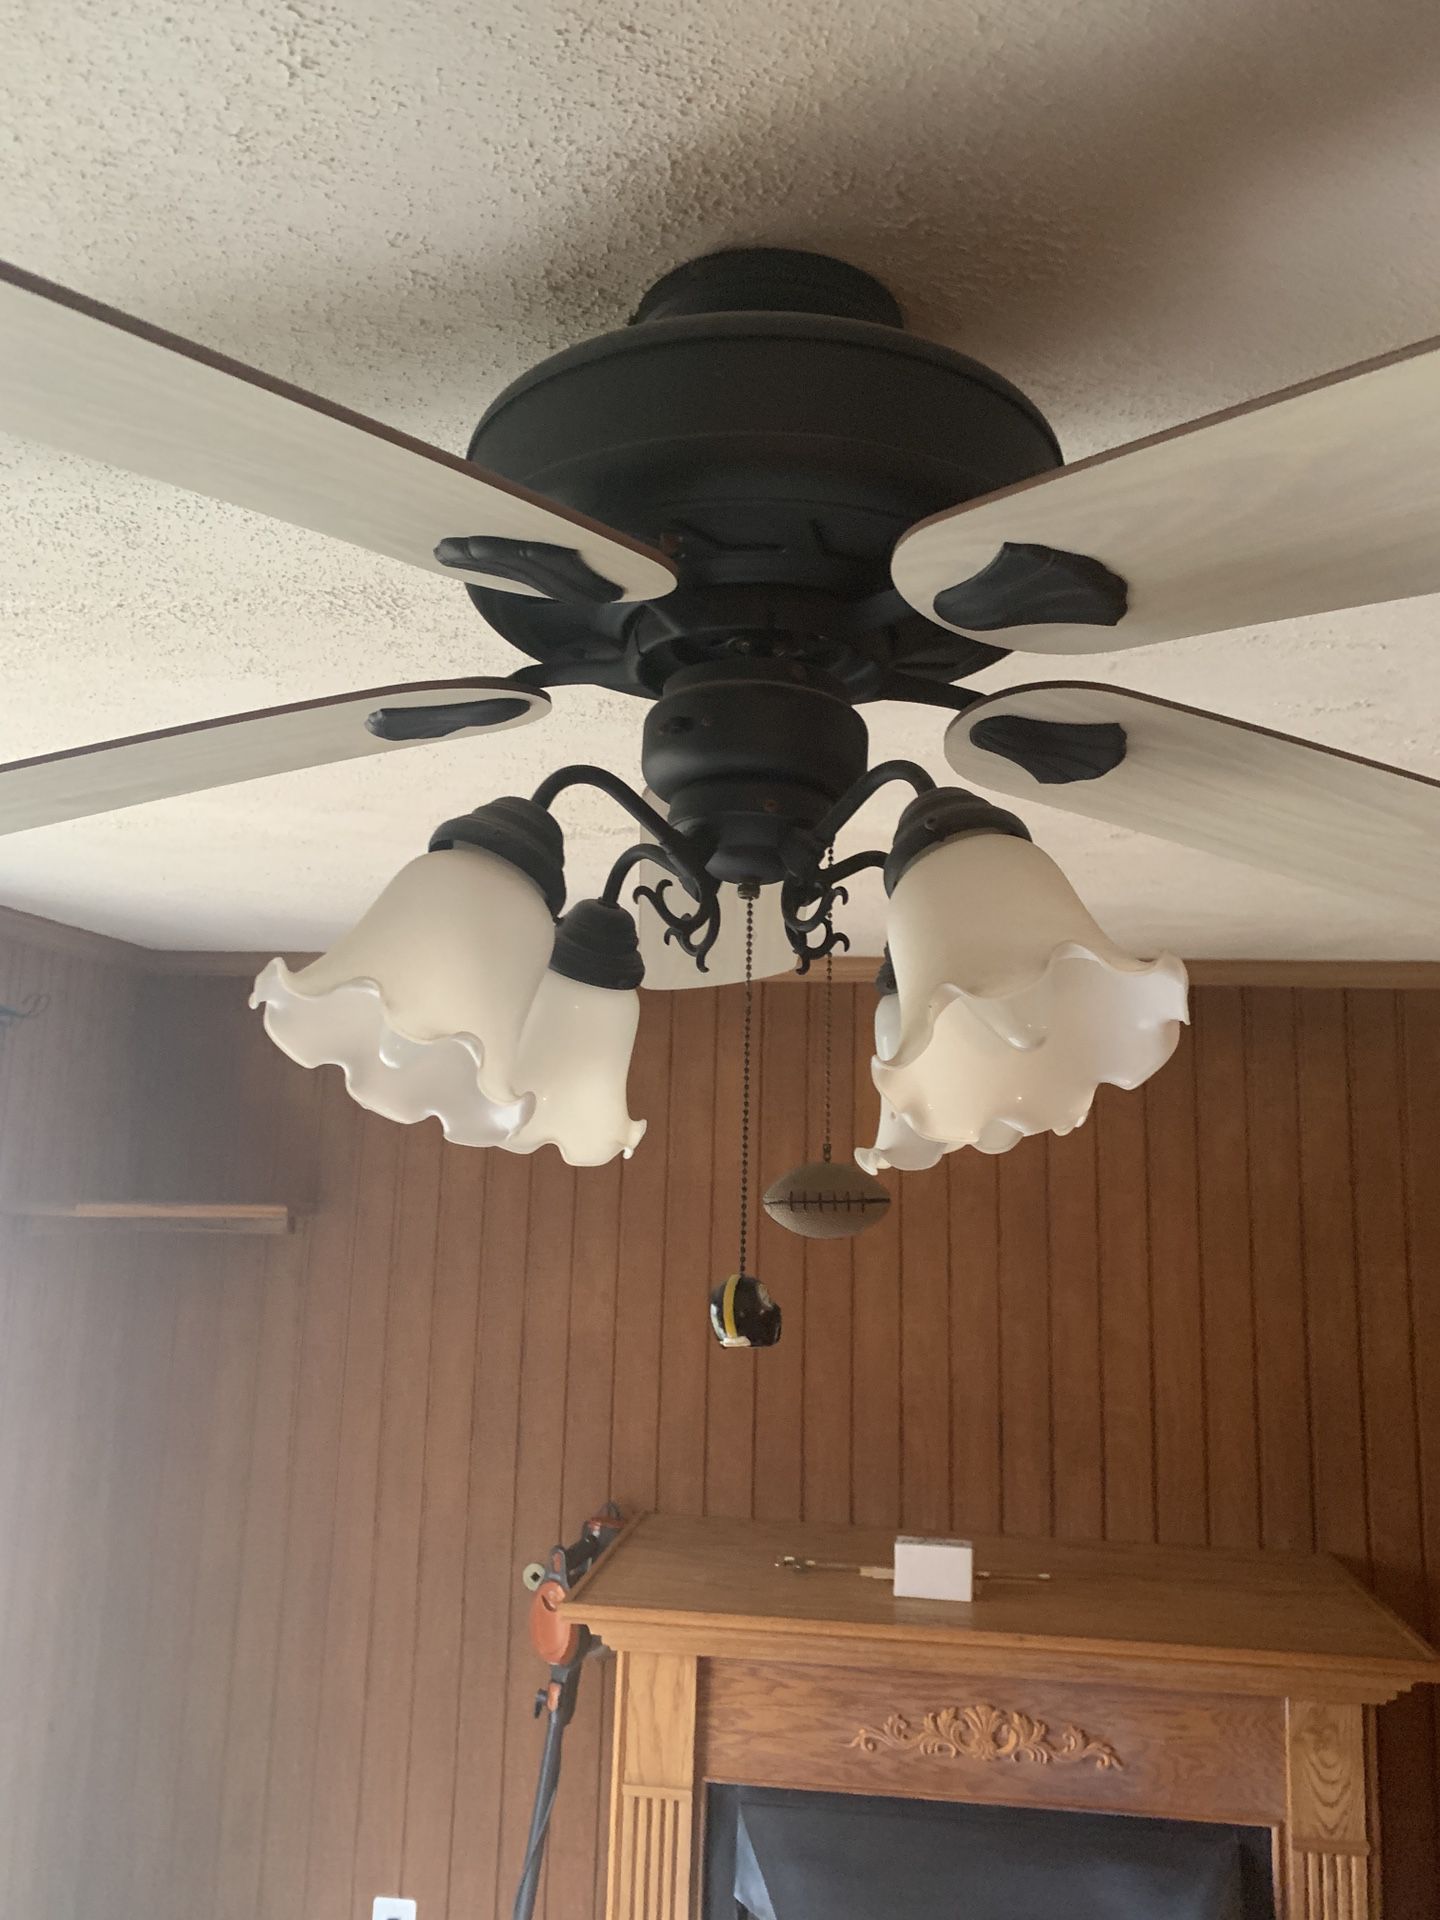 Two matching ceiling fans